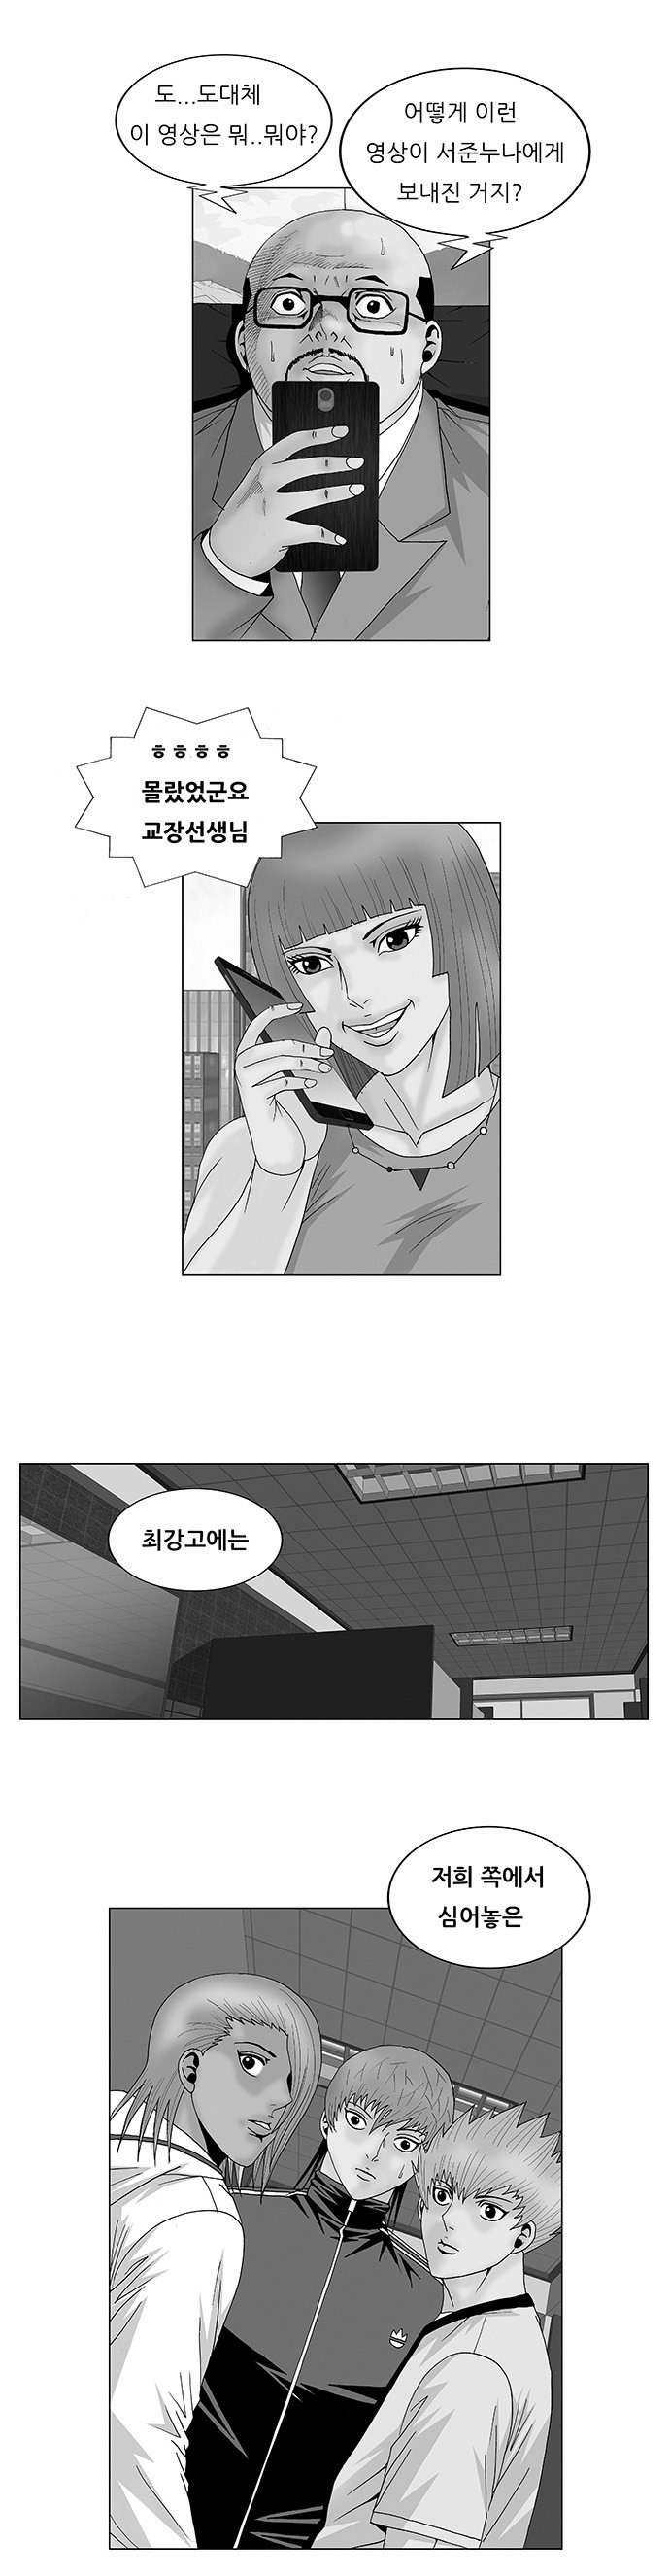 Ultimate Legend - Kang Hae Hyo - Chapter 108 - Page 1